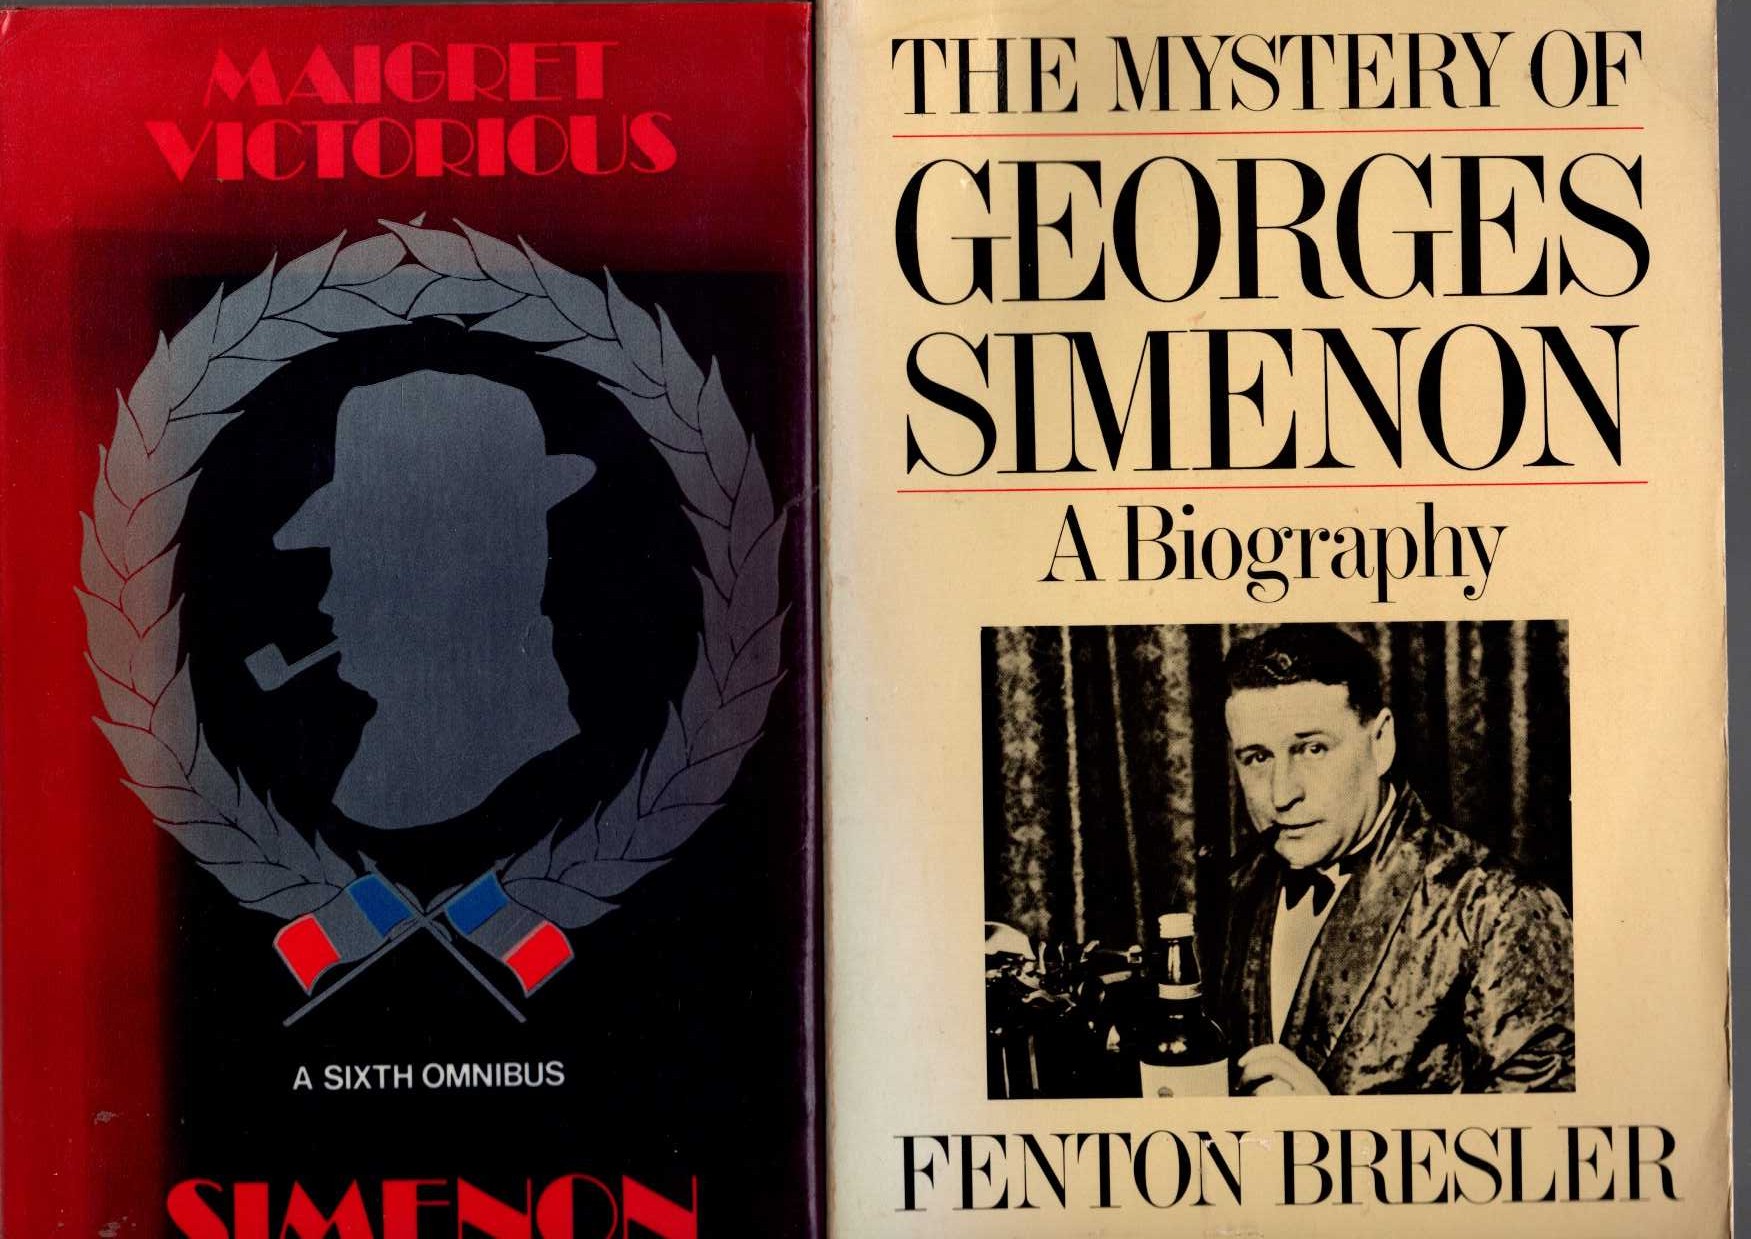 (Fenton Bresler) THE MYSTERY OF GEORGES SIMENON. A Biography front book cover image